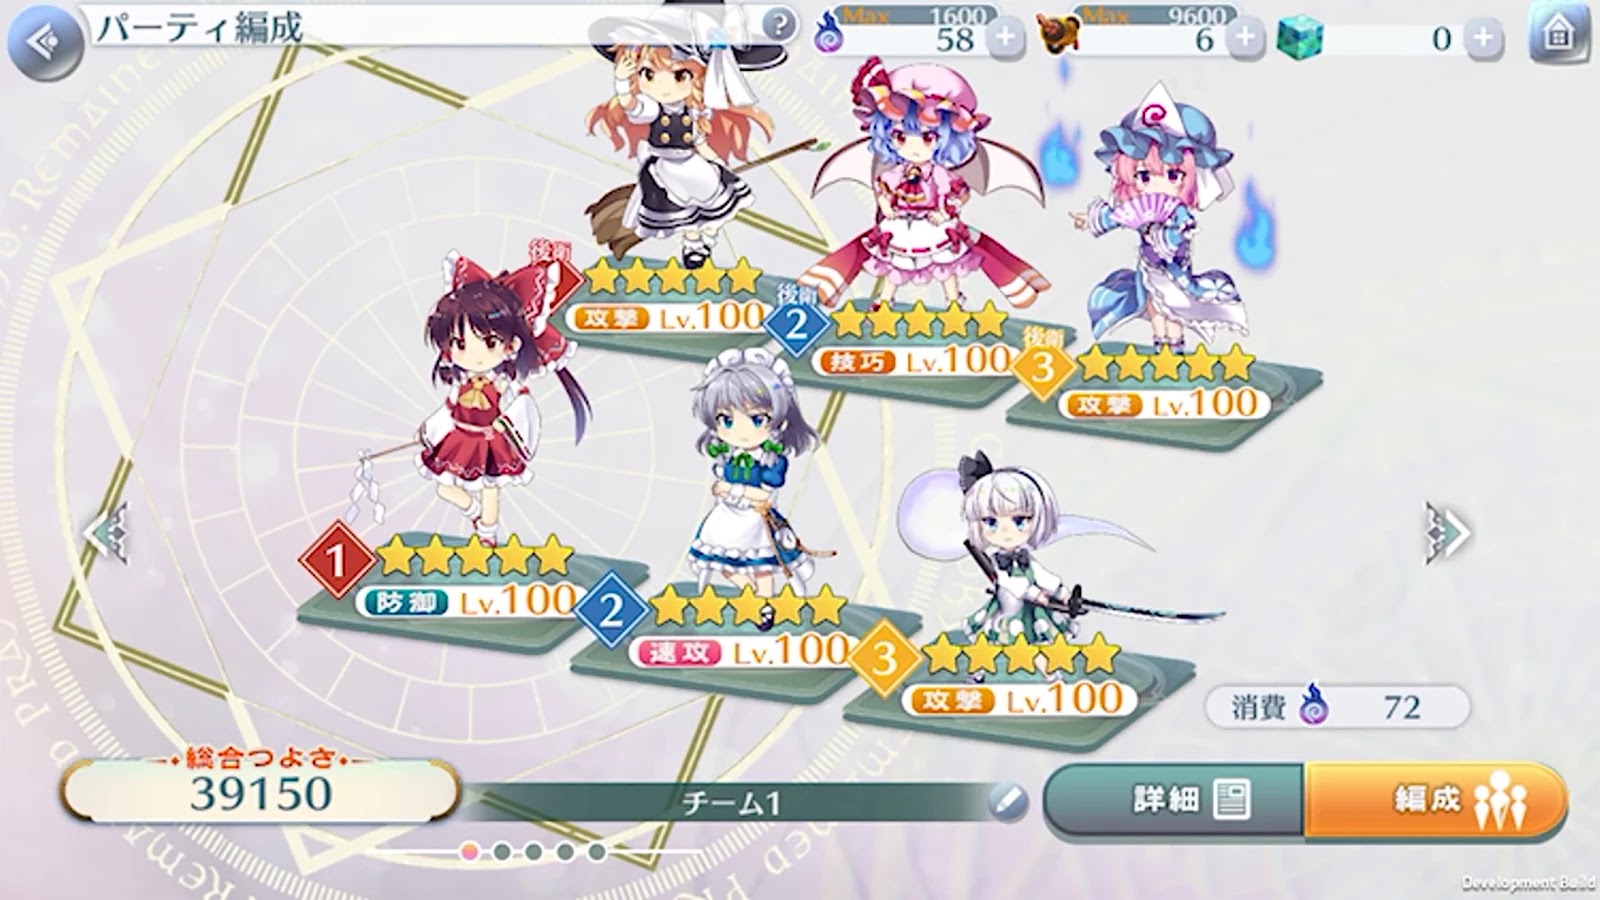 Touhou Lost Word First Official Rpg Touhou Game On Android News About Global Server